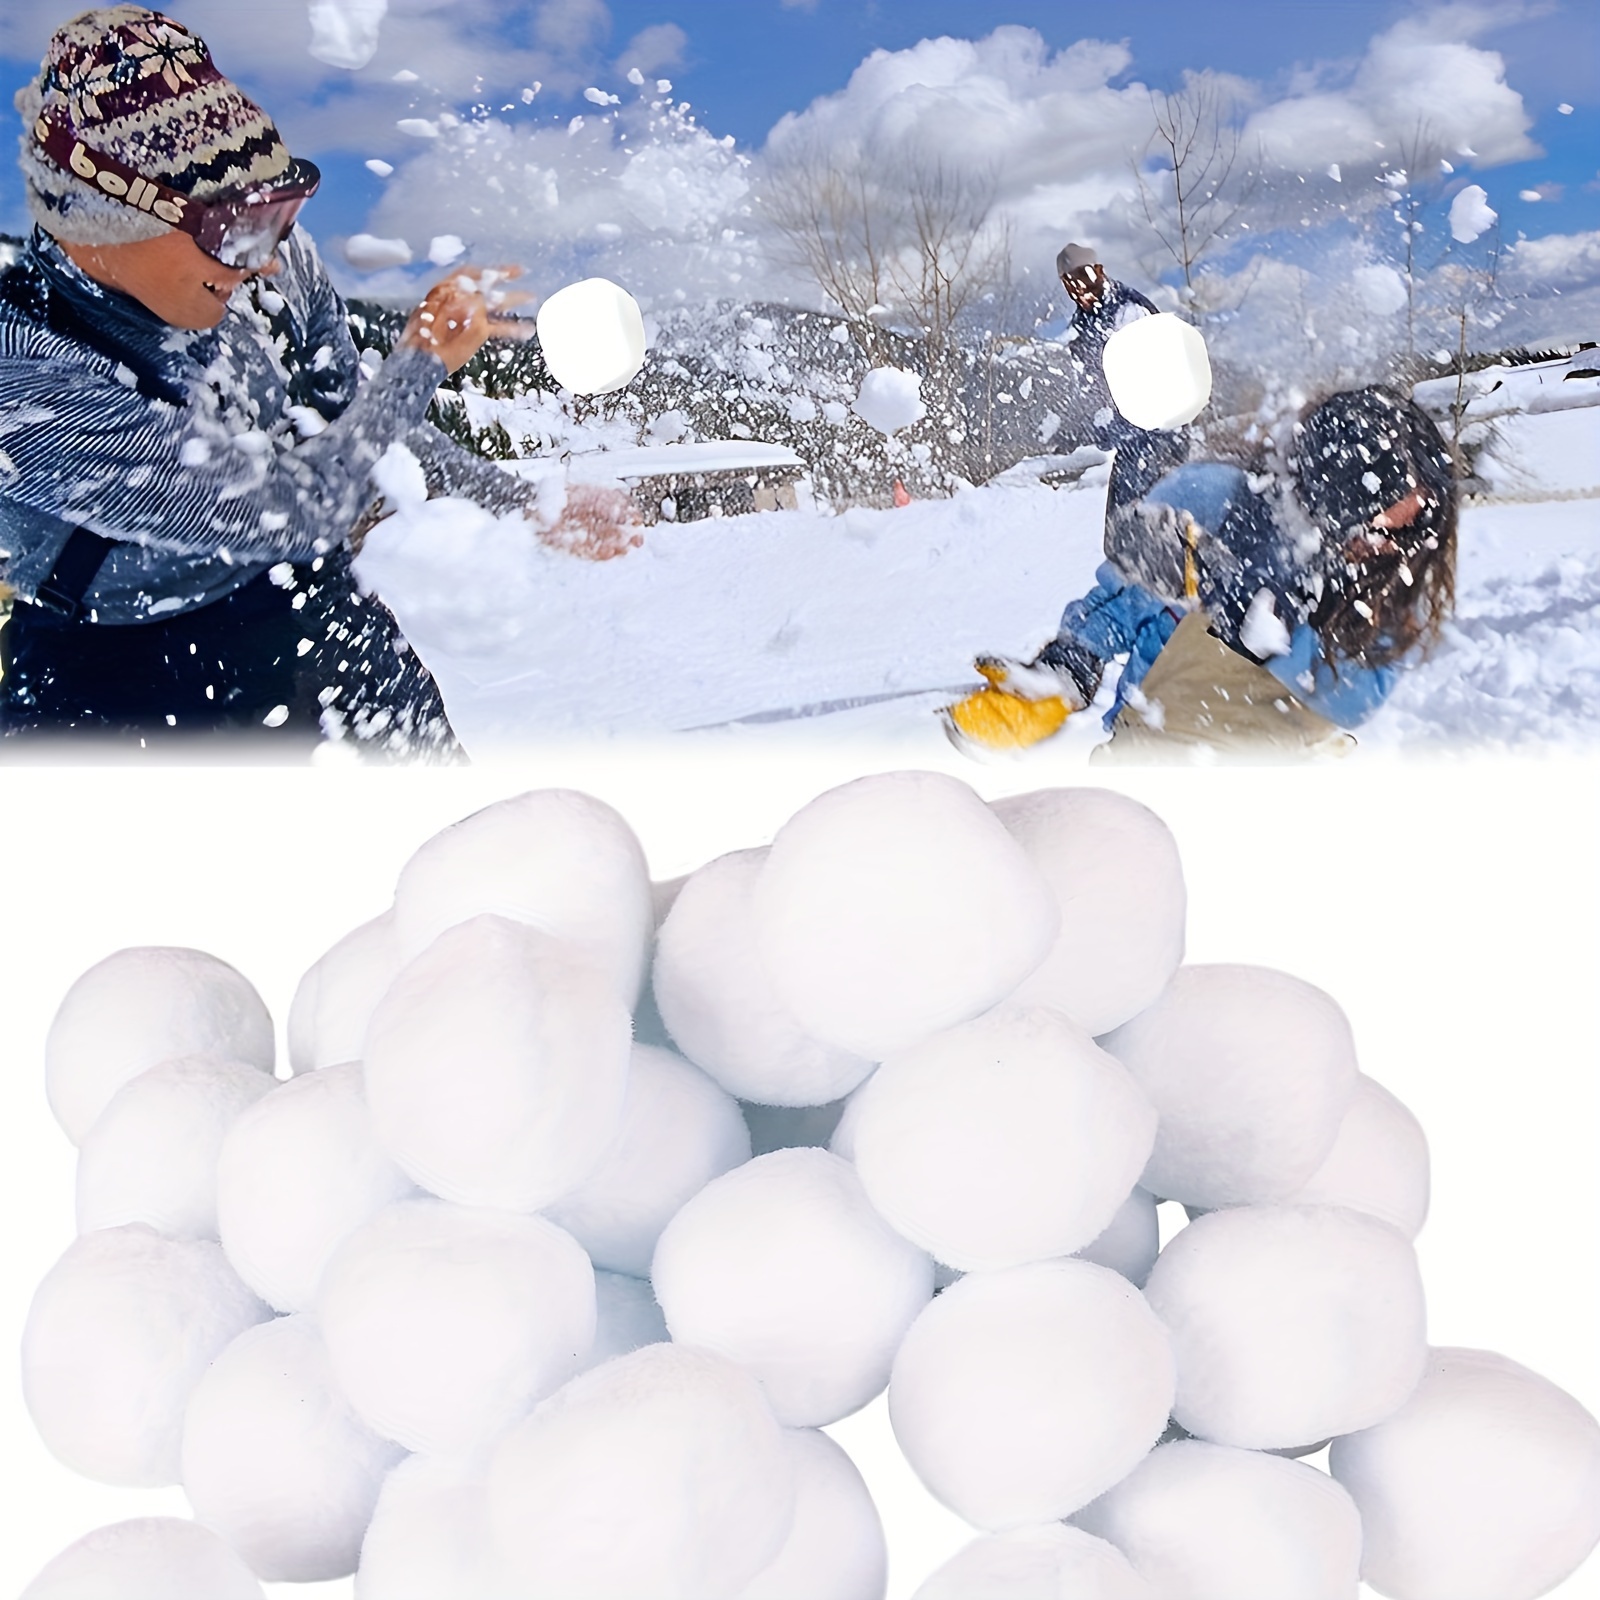 50pcs 5cm Realistic Fake Soft Snowball Indoor Snowball Game Fight Props  Christmas Tree Hanging Ornaments Fun Winter Decoration - AliExpress